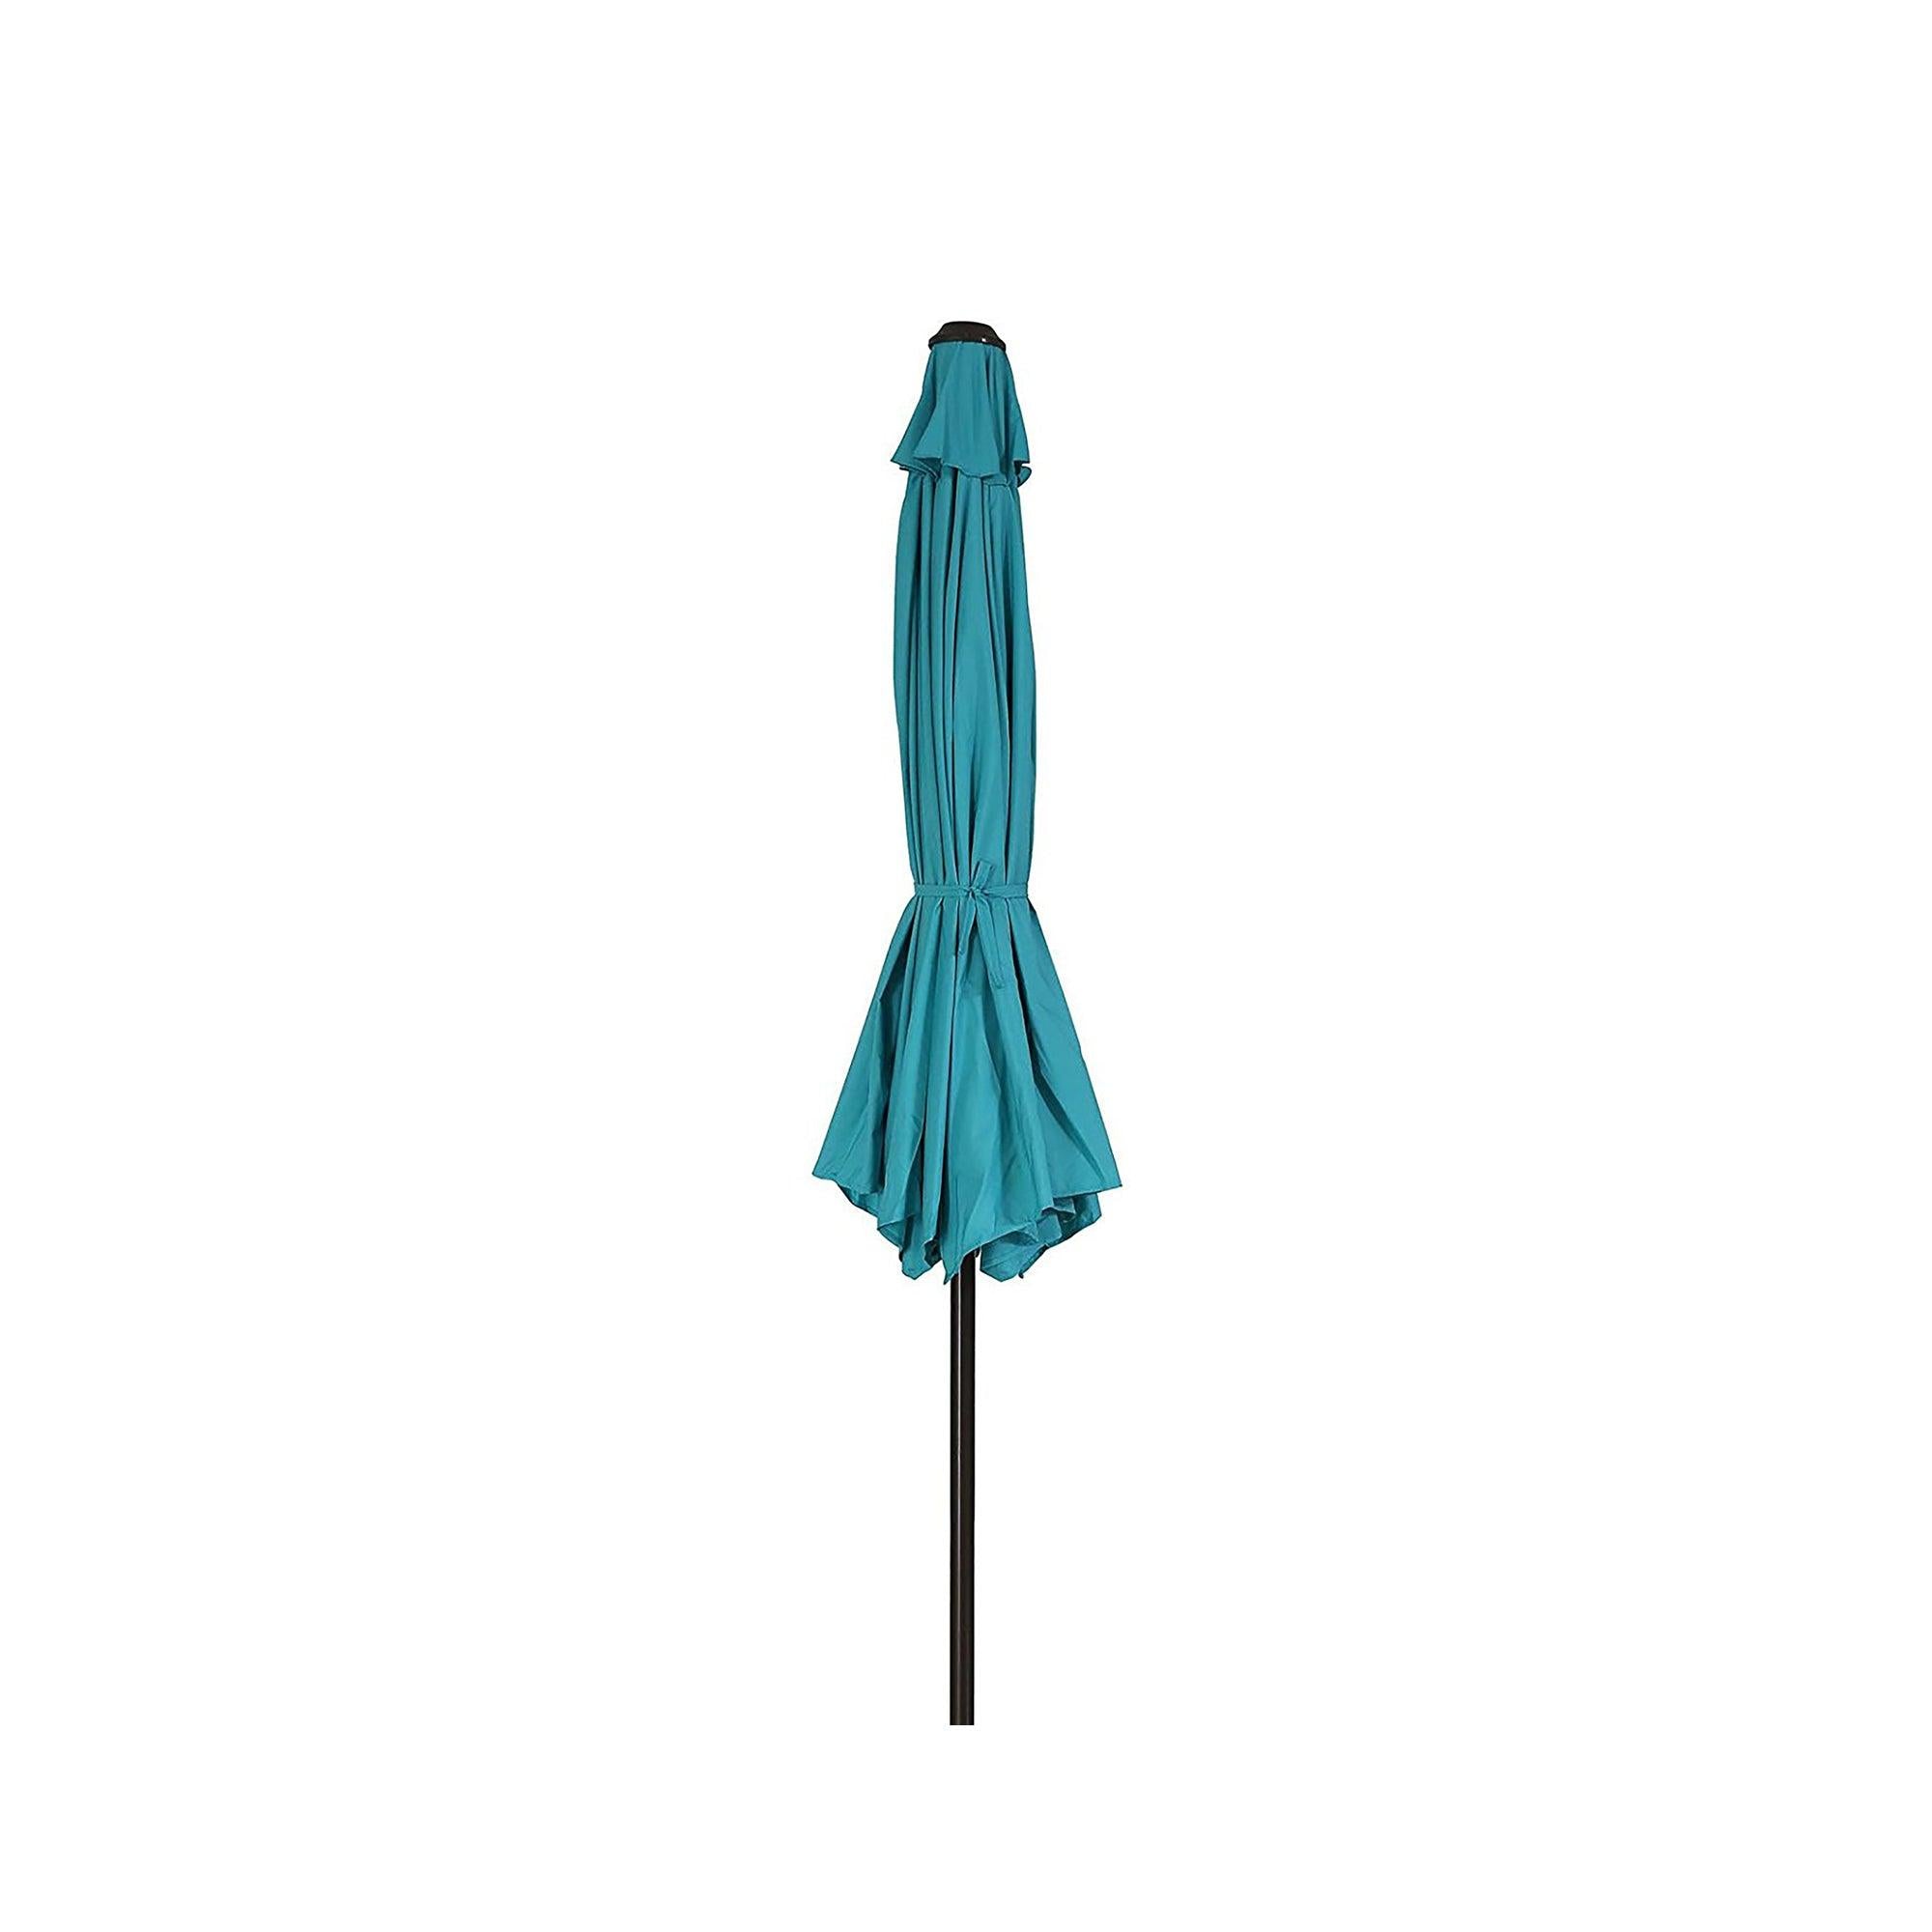 9 Ft Patio Umbrella for Outdoor Shade, Turquoise